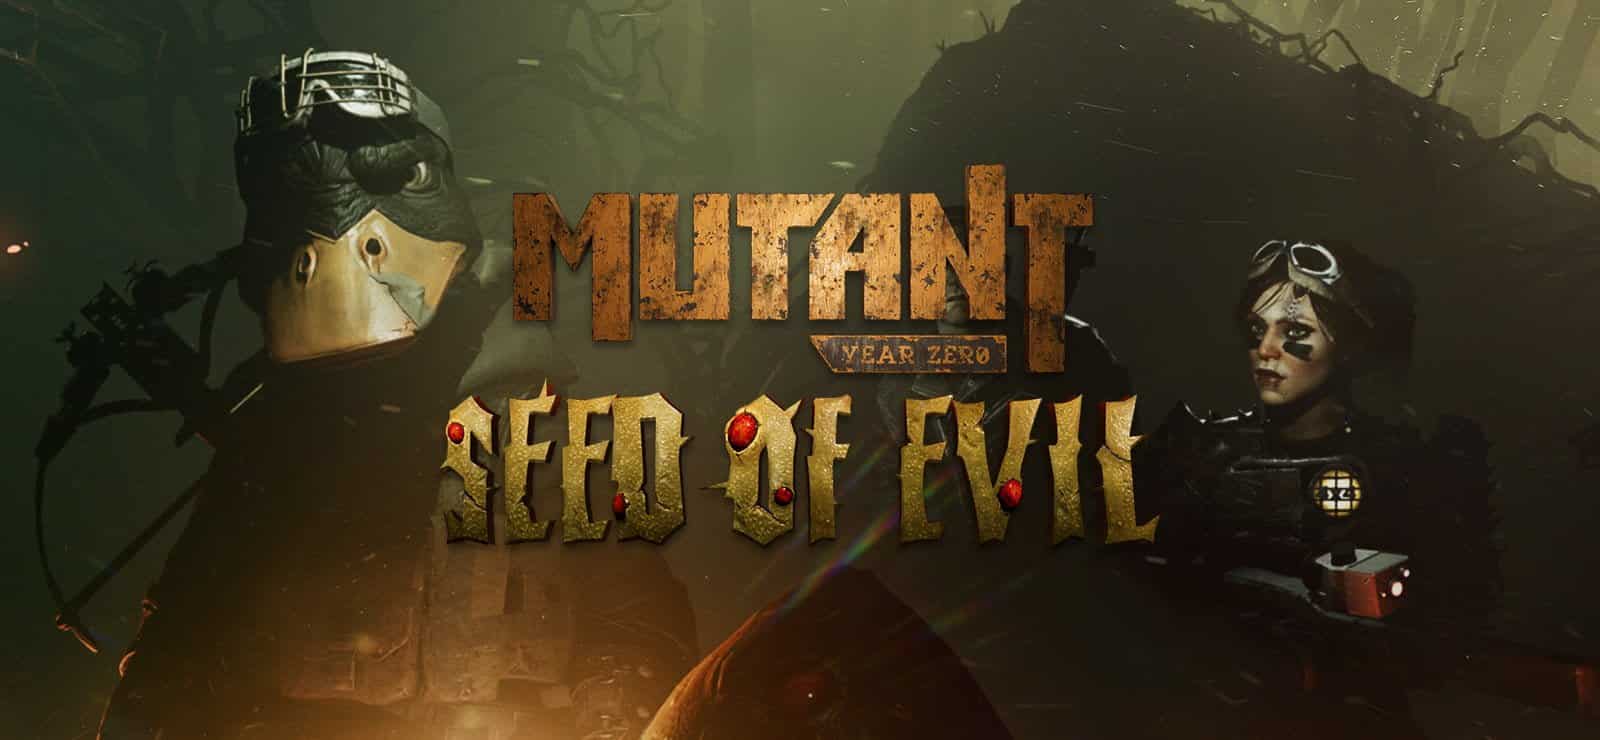 Mutant Year Zero Seed of Evil PS4 Version Full Game Free Download 2019